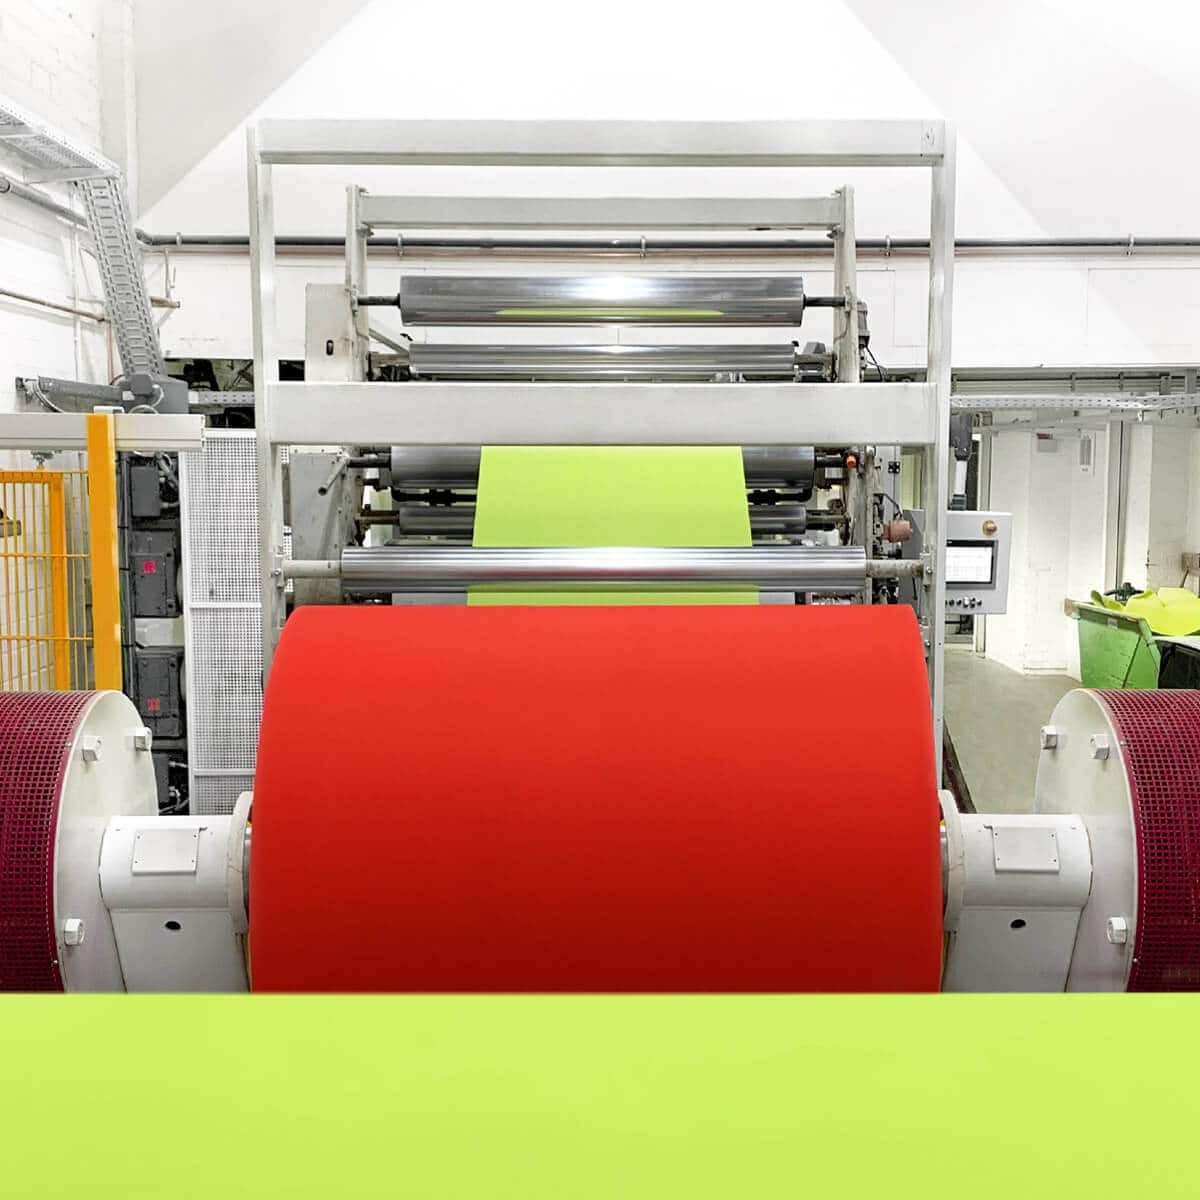 Reel-to-sheet lamination service example: cardboard red / green